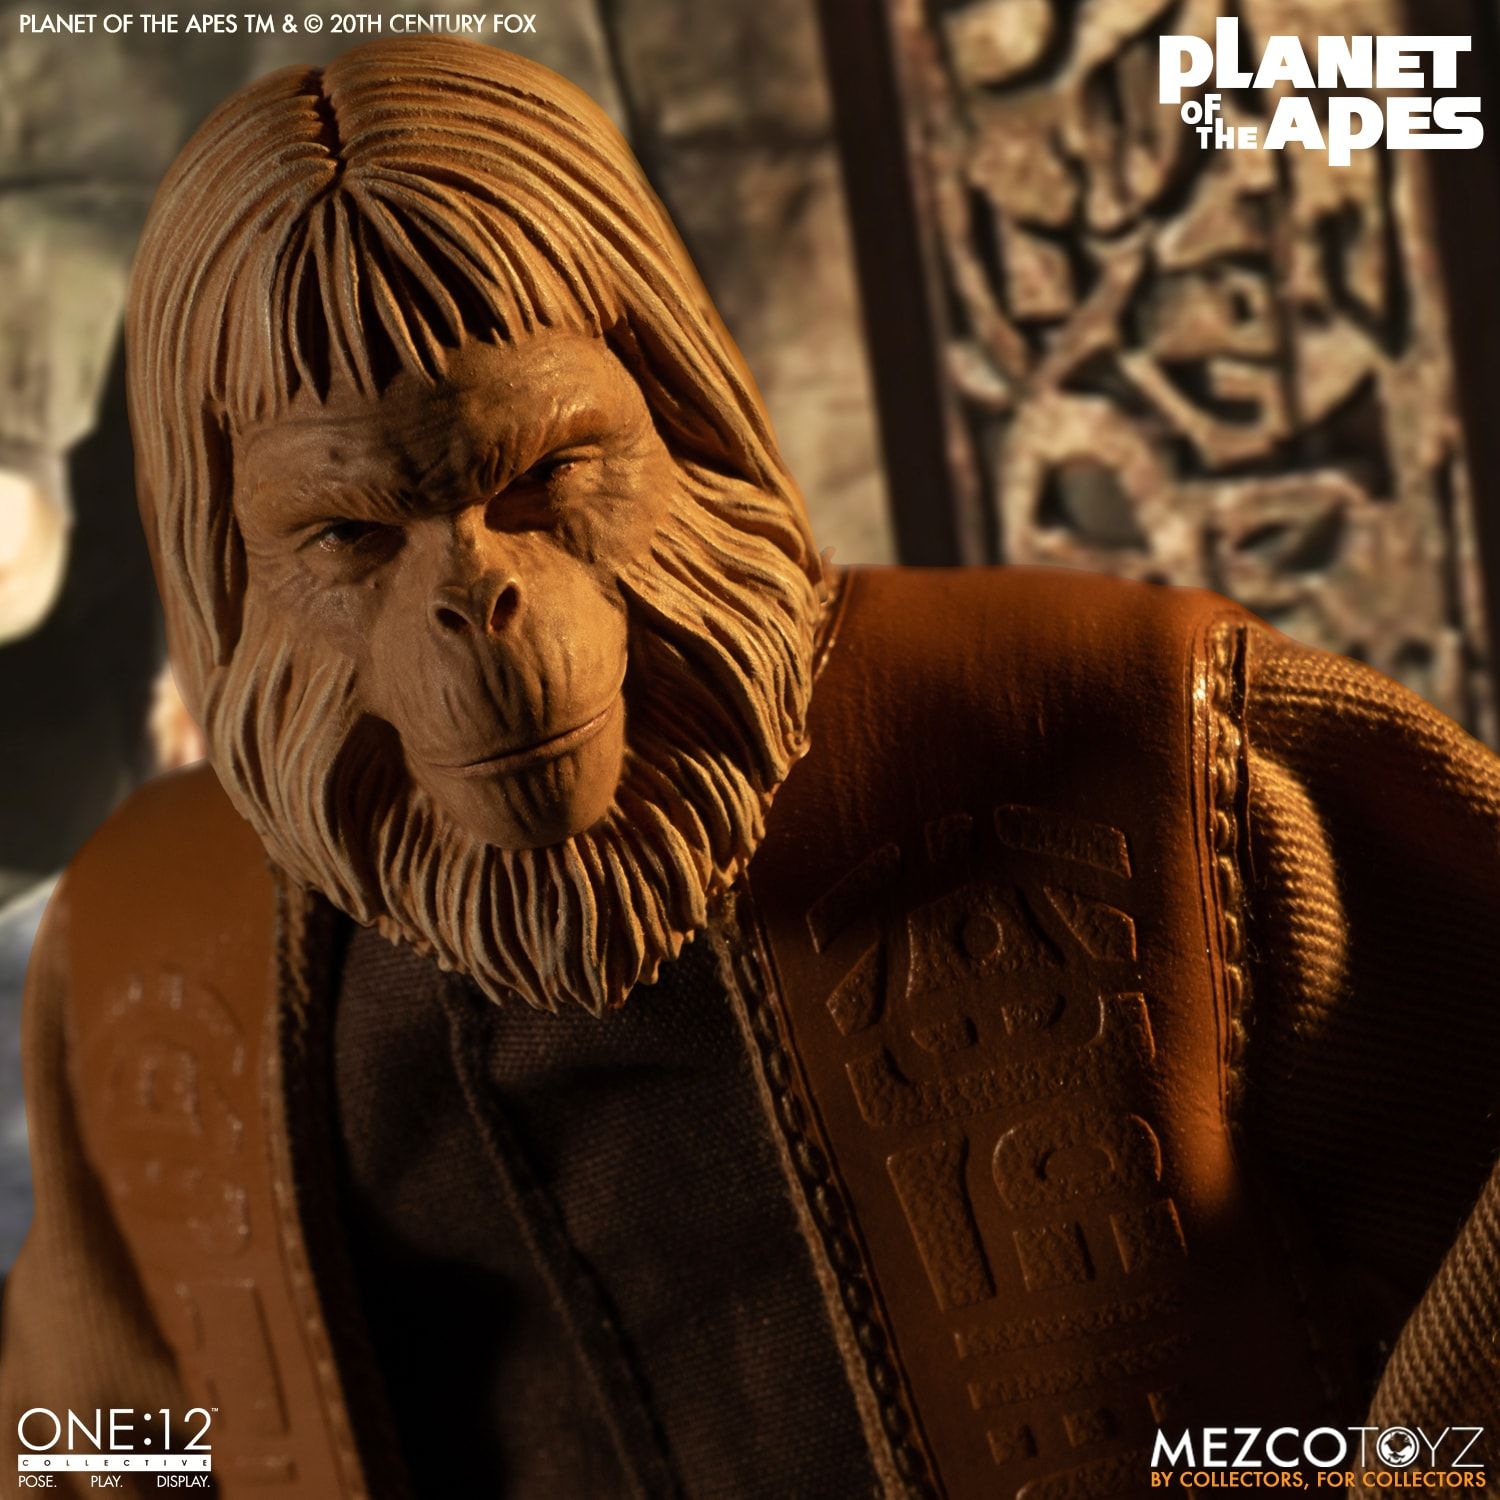 Mezco - One:12 Collective - Planet of the Apes (1968) - Dr. Zaius